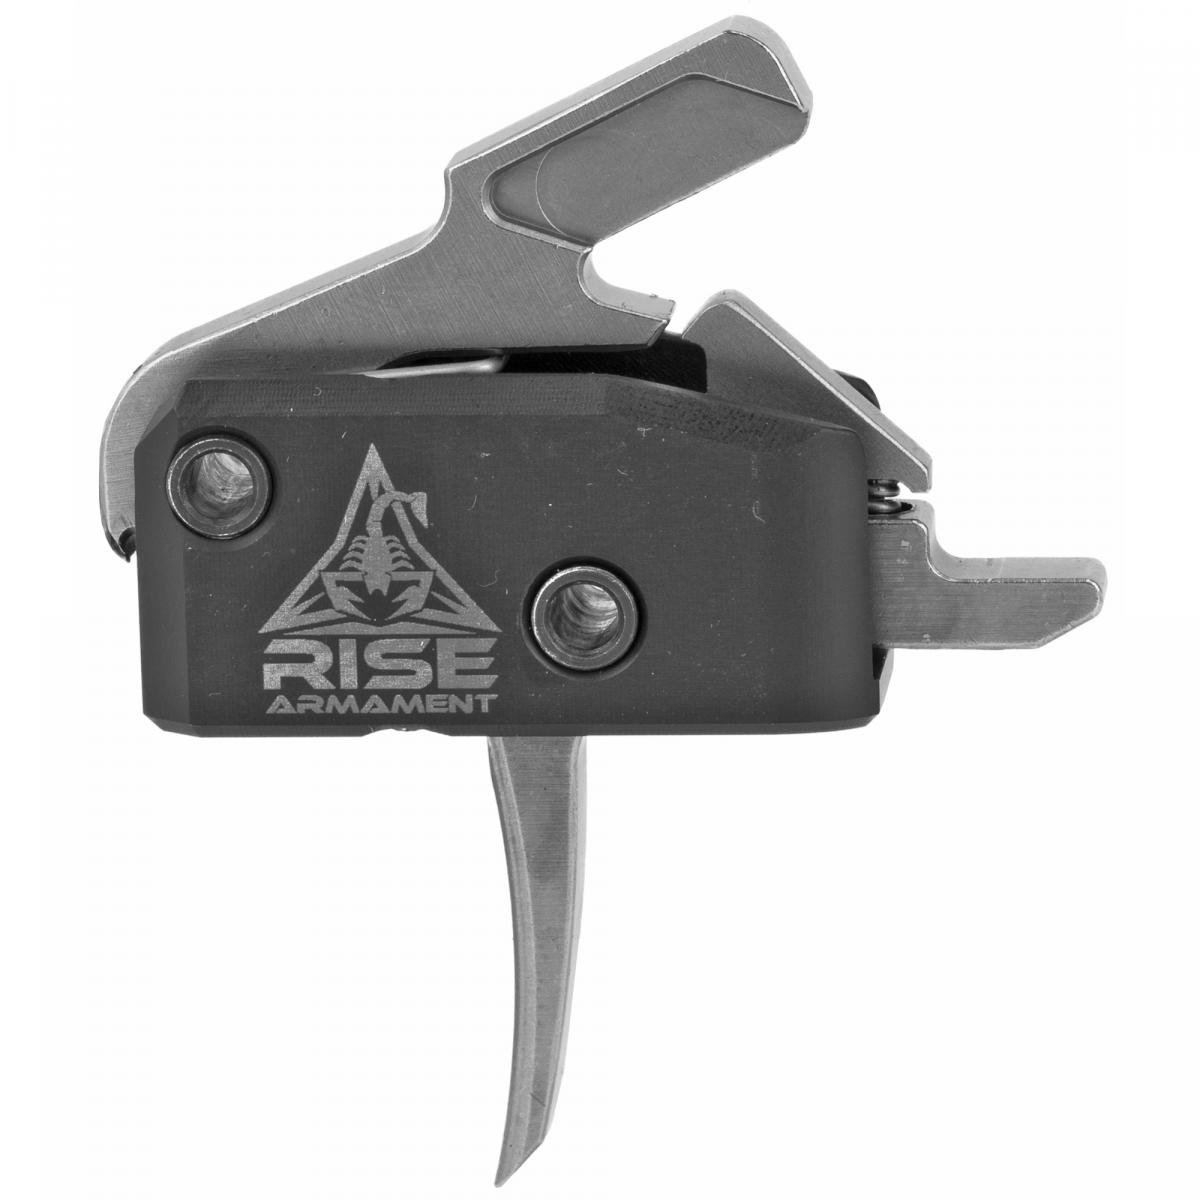 Rise High Performance Trigger Silver - 4Shooters